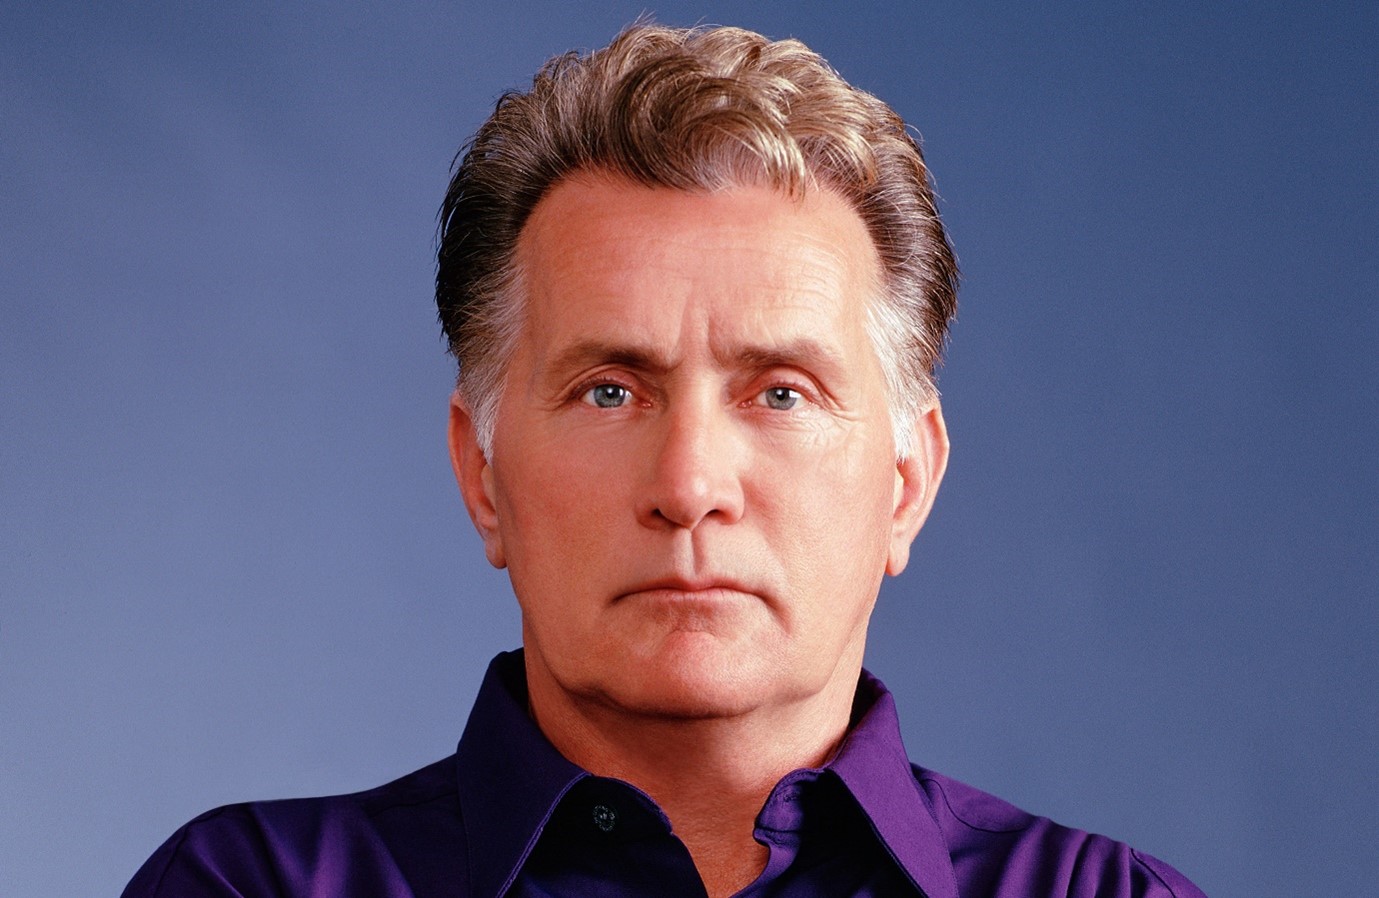 Martin Sheen Wife: Who is the actor married to?